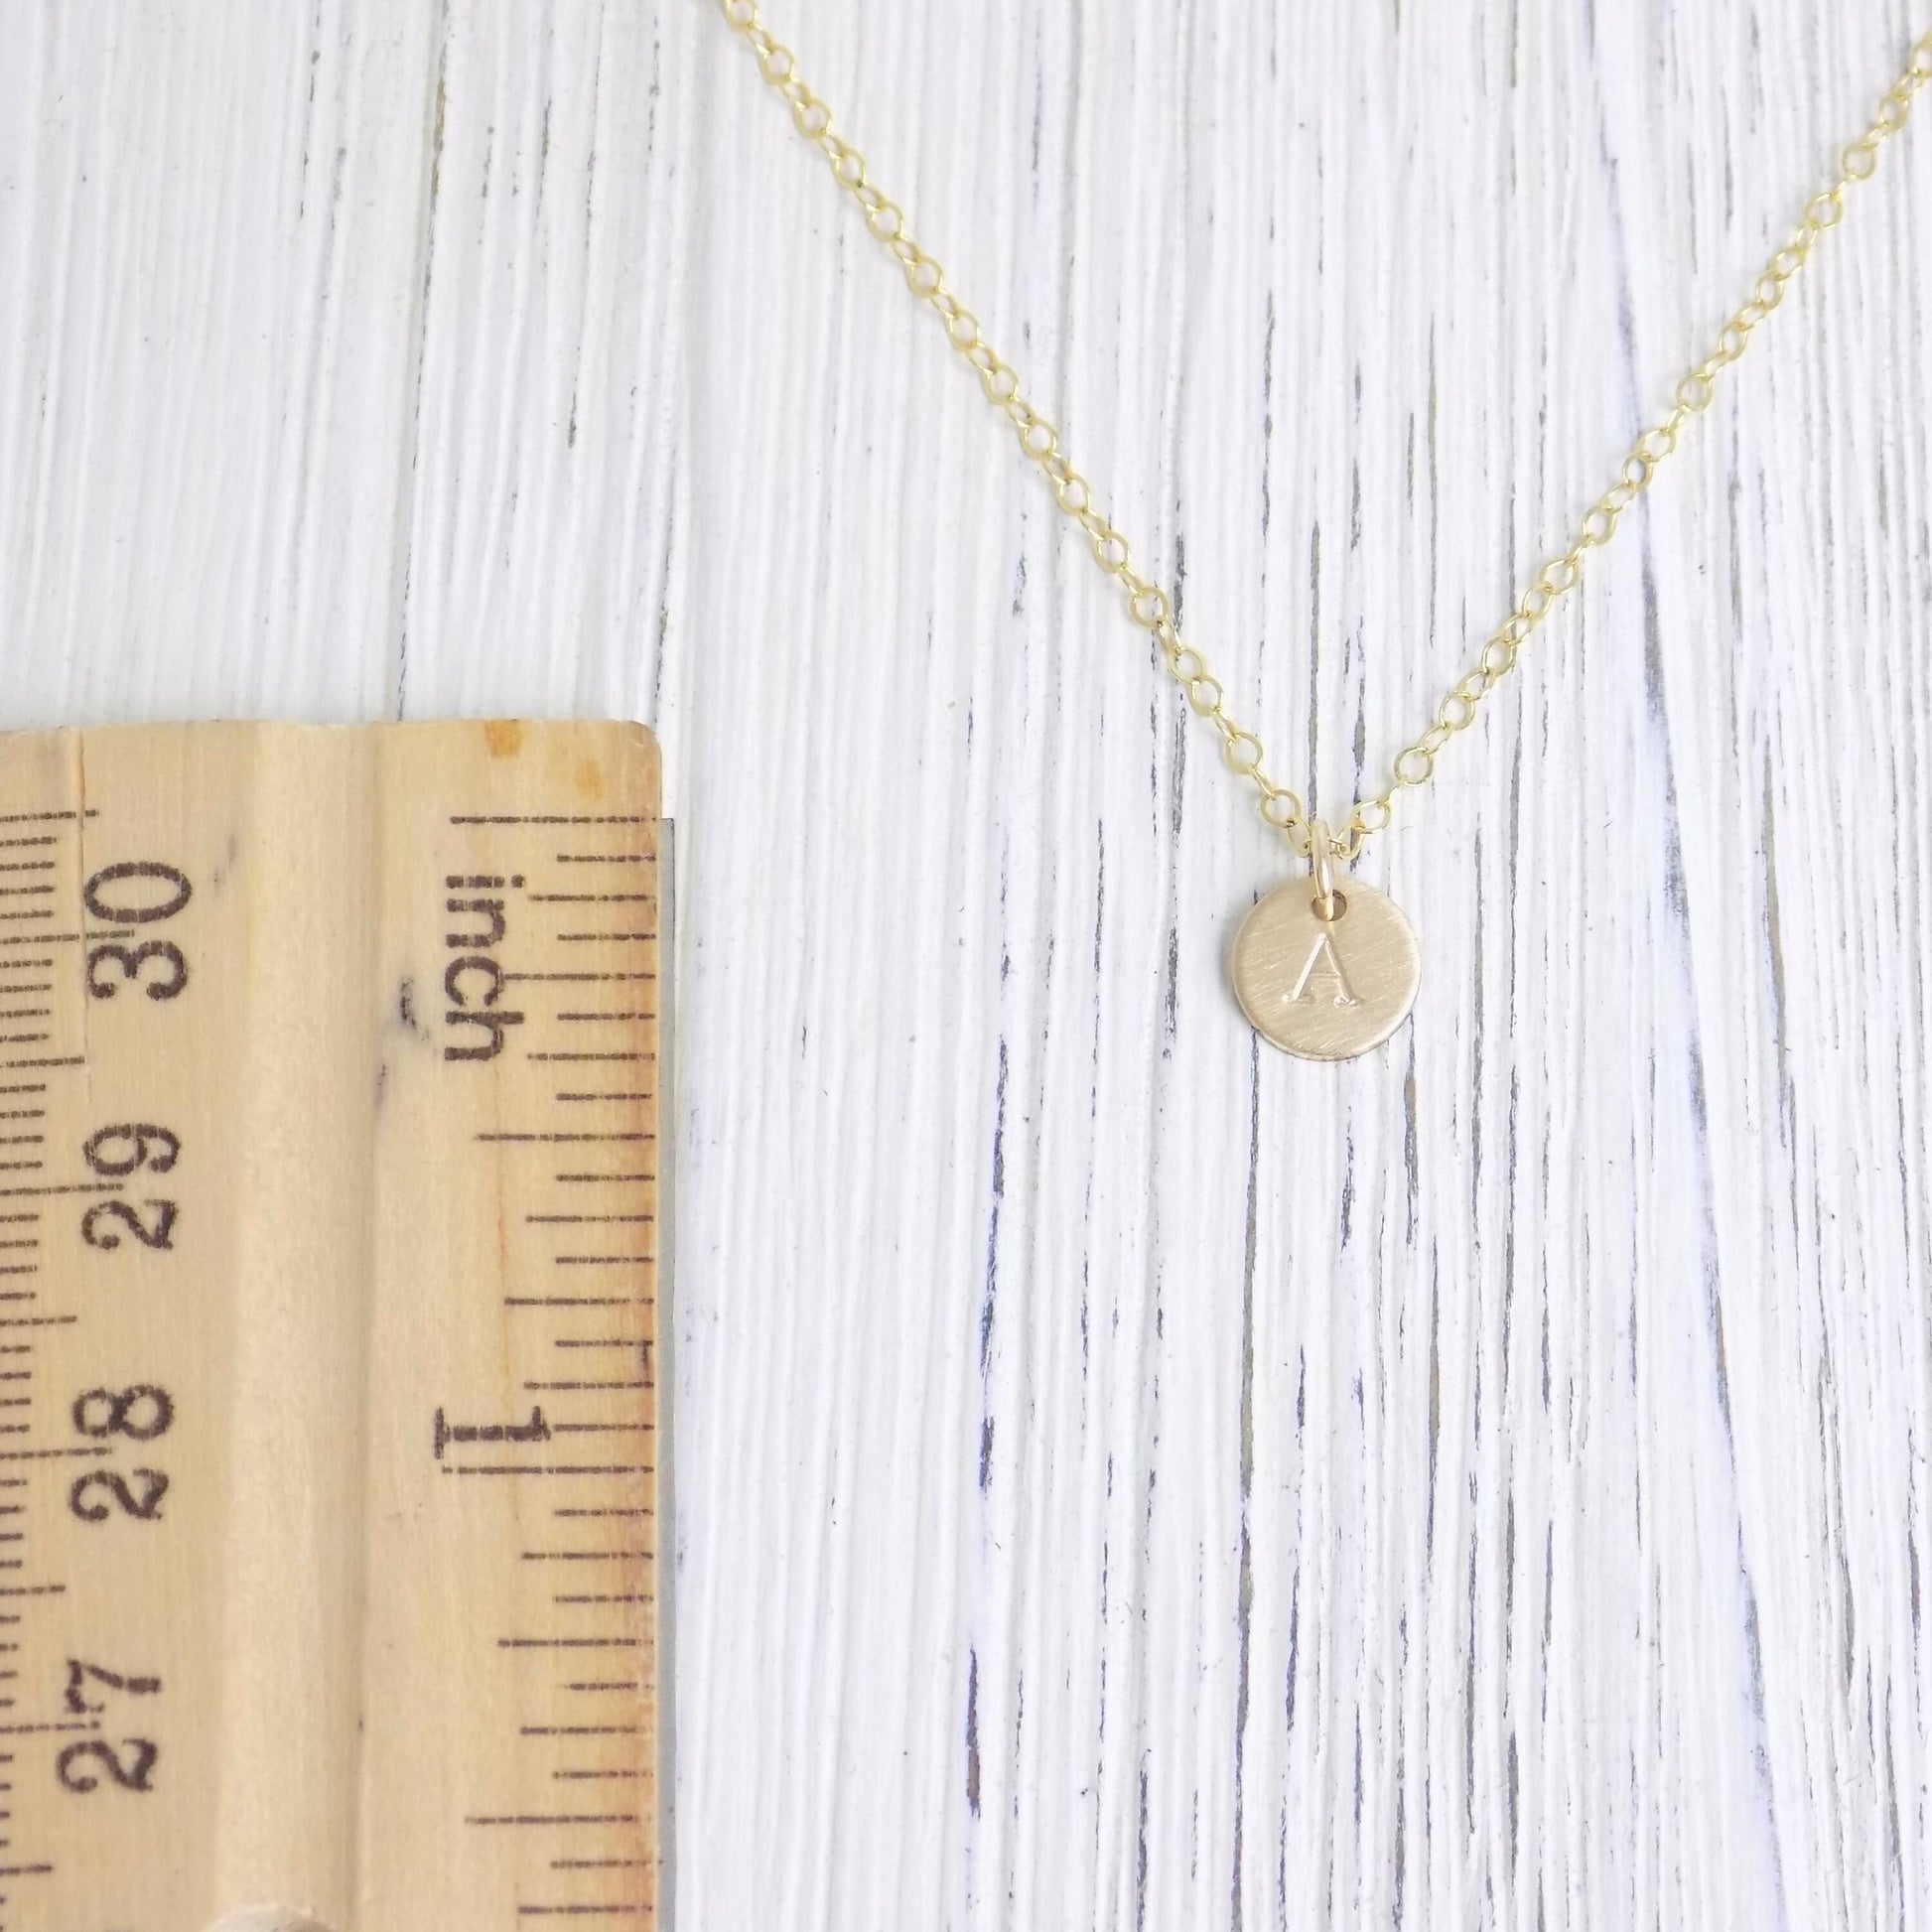 Dainty Initial Charm Necklace - 14K Gold Filled Brushed Matte Satin Finish - Personalized Layering Necklace Gold Coin - Christmas Gift Women